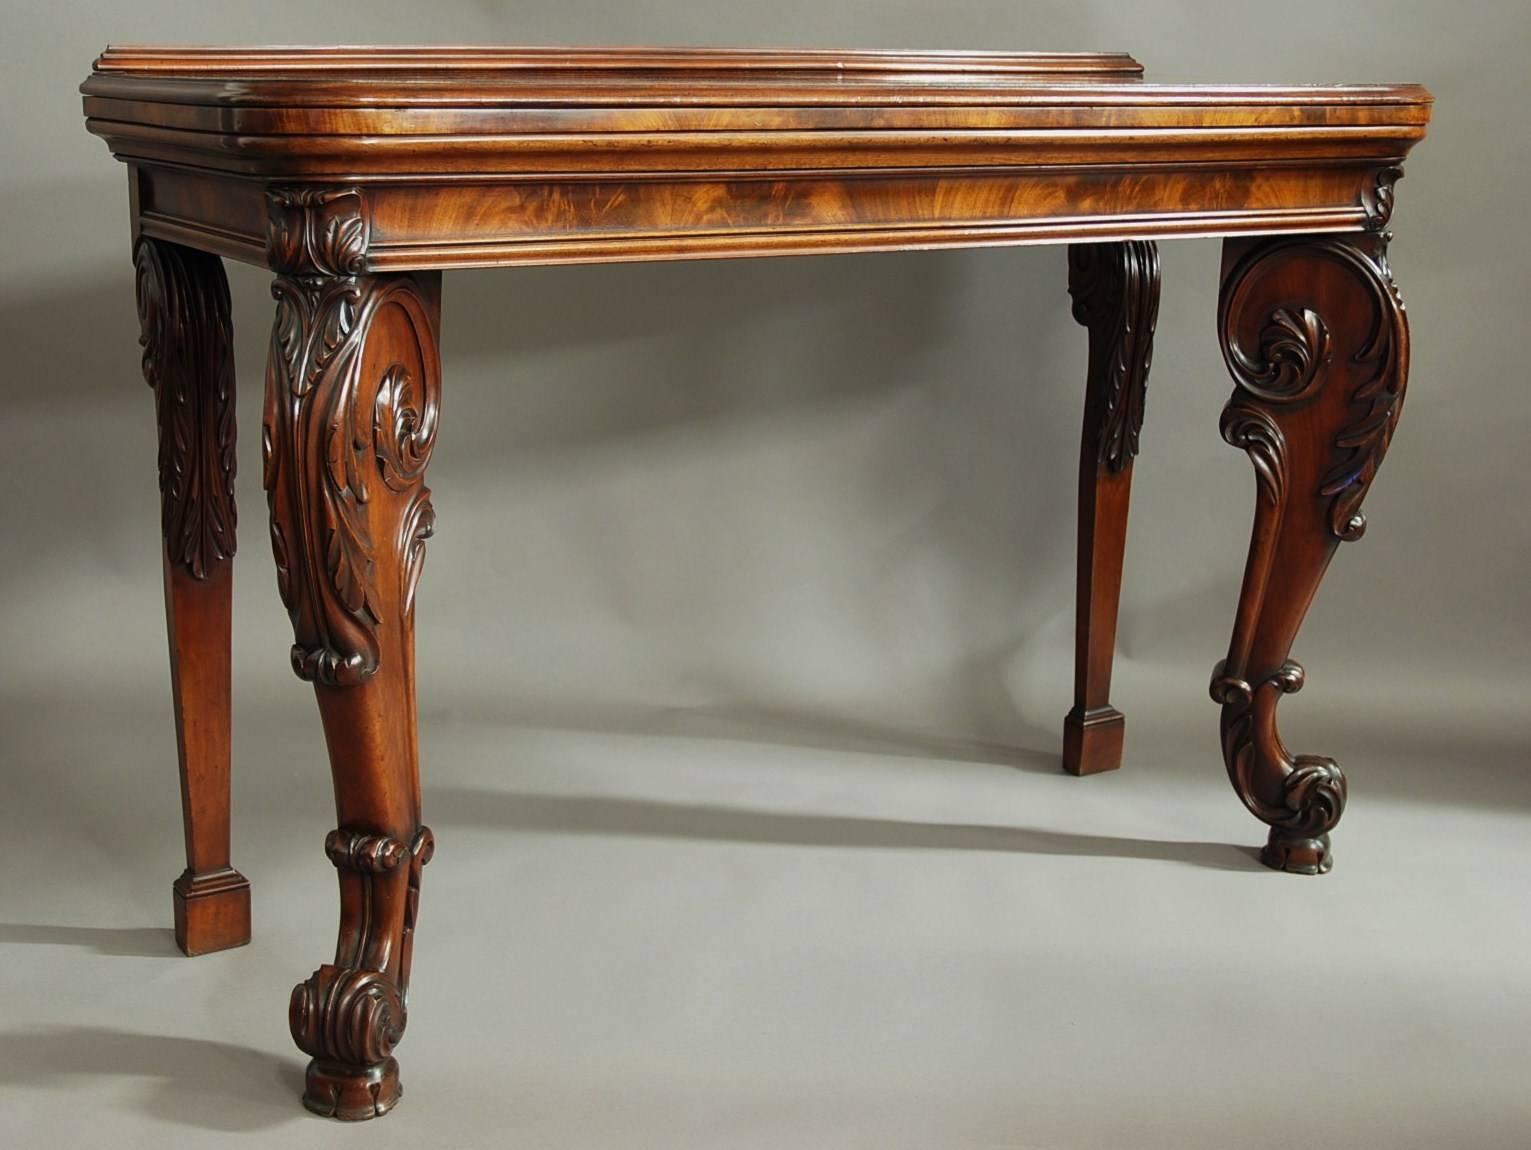 English Superb Quality William IV Mahogany Console Table in the Manner of Gillows